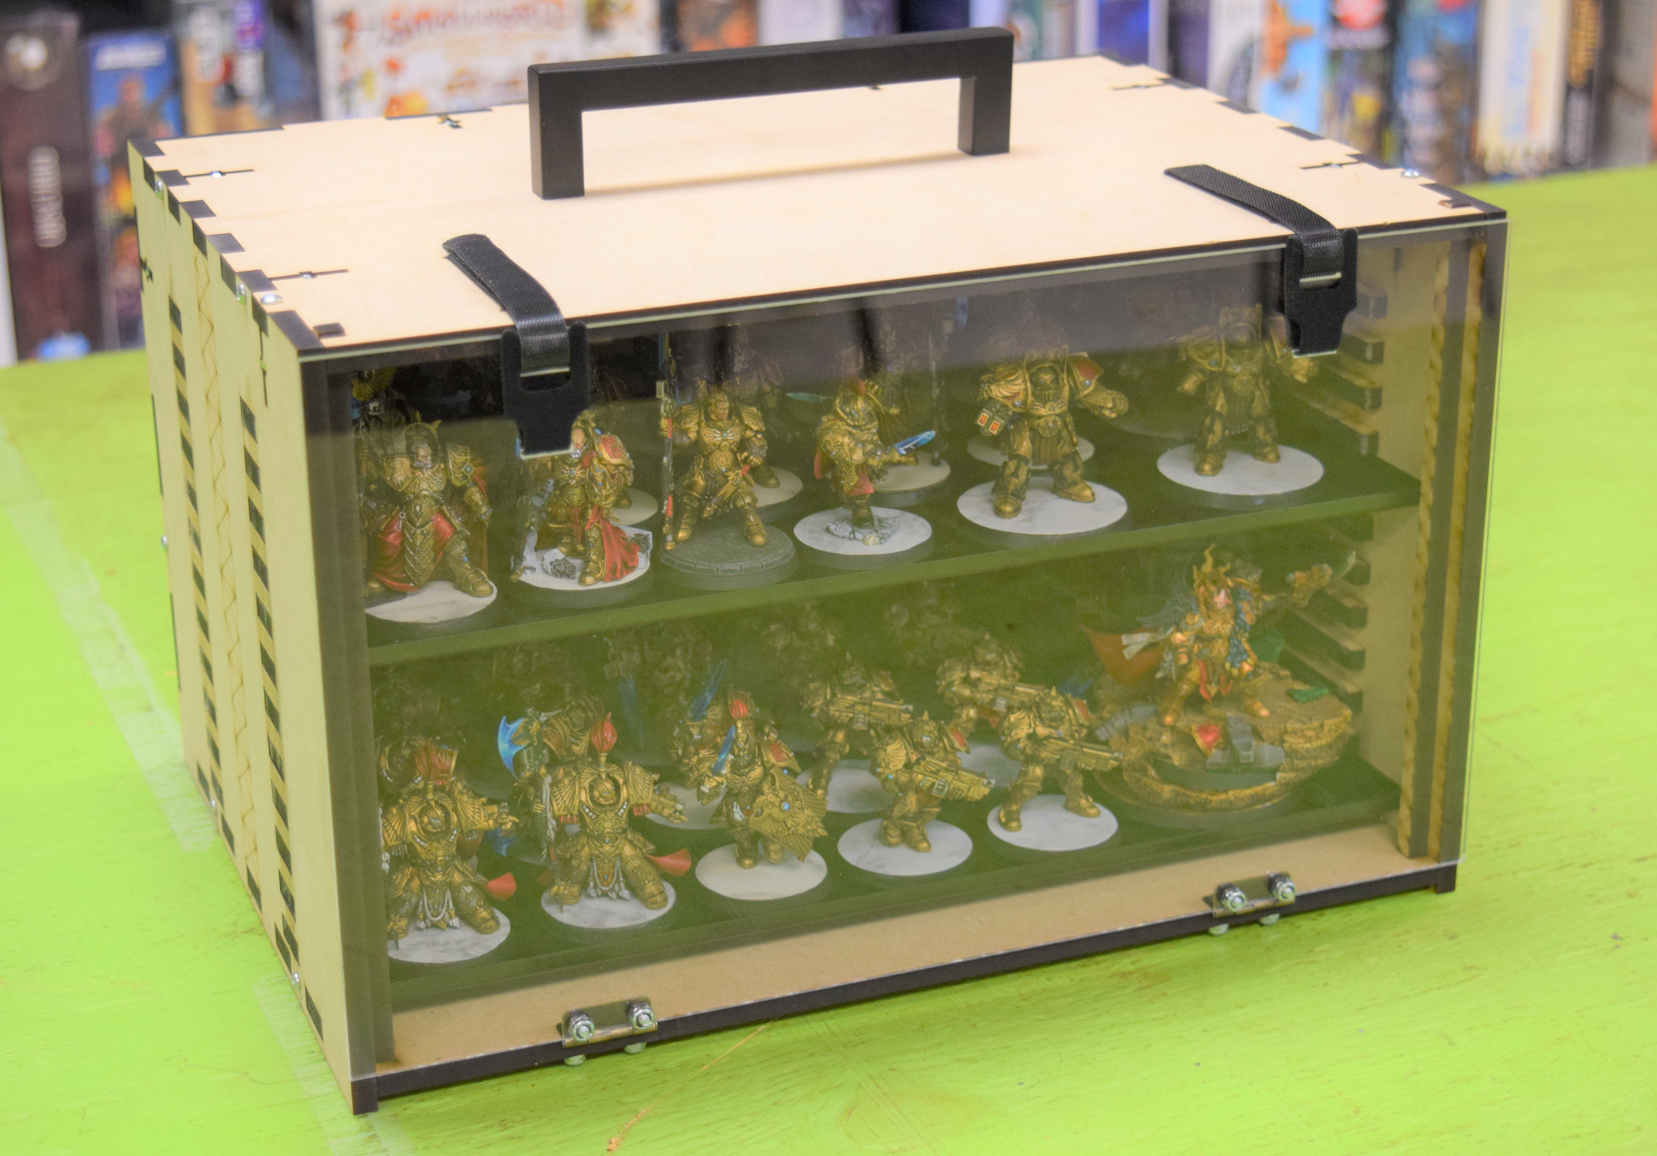 The Terminus - Miniature Display/Carrying Case by DPS Creations